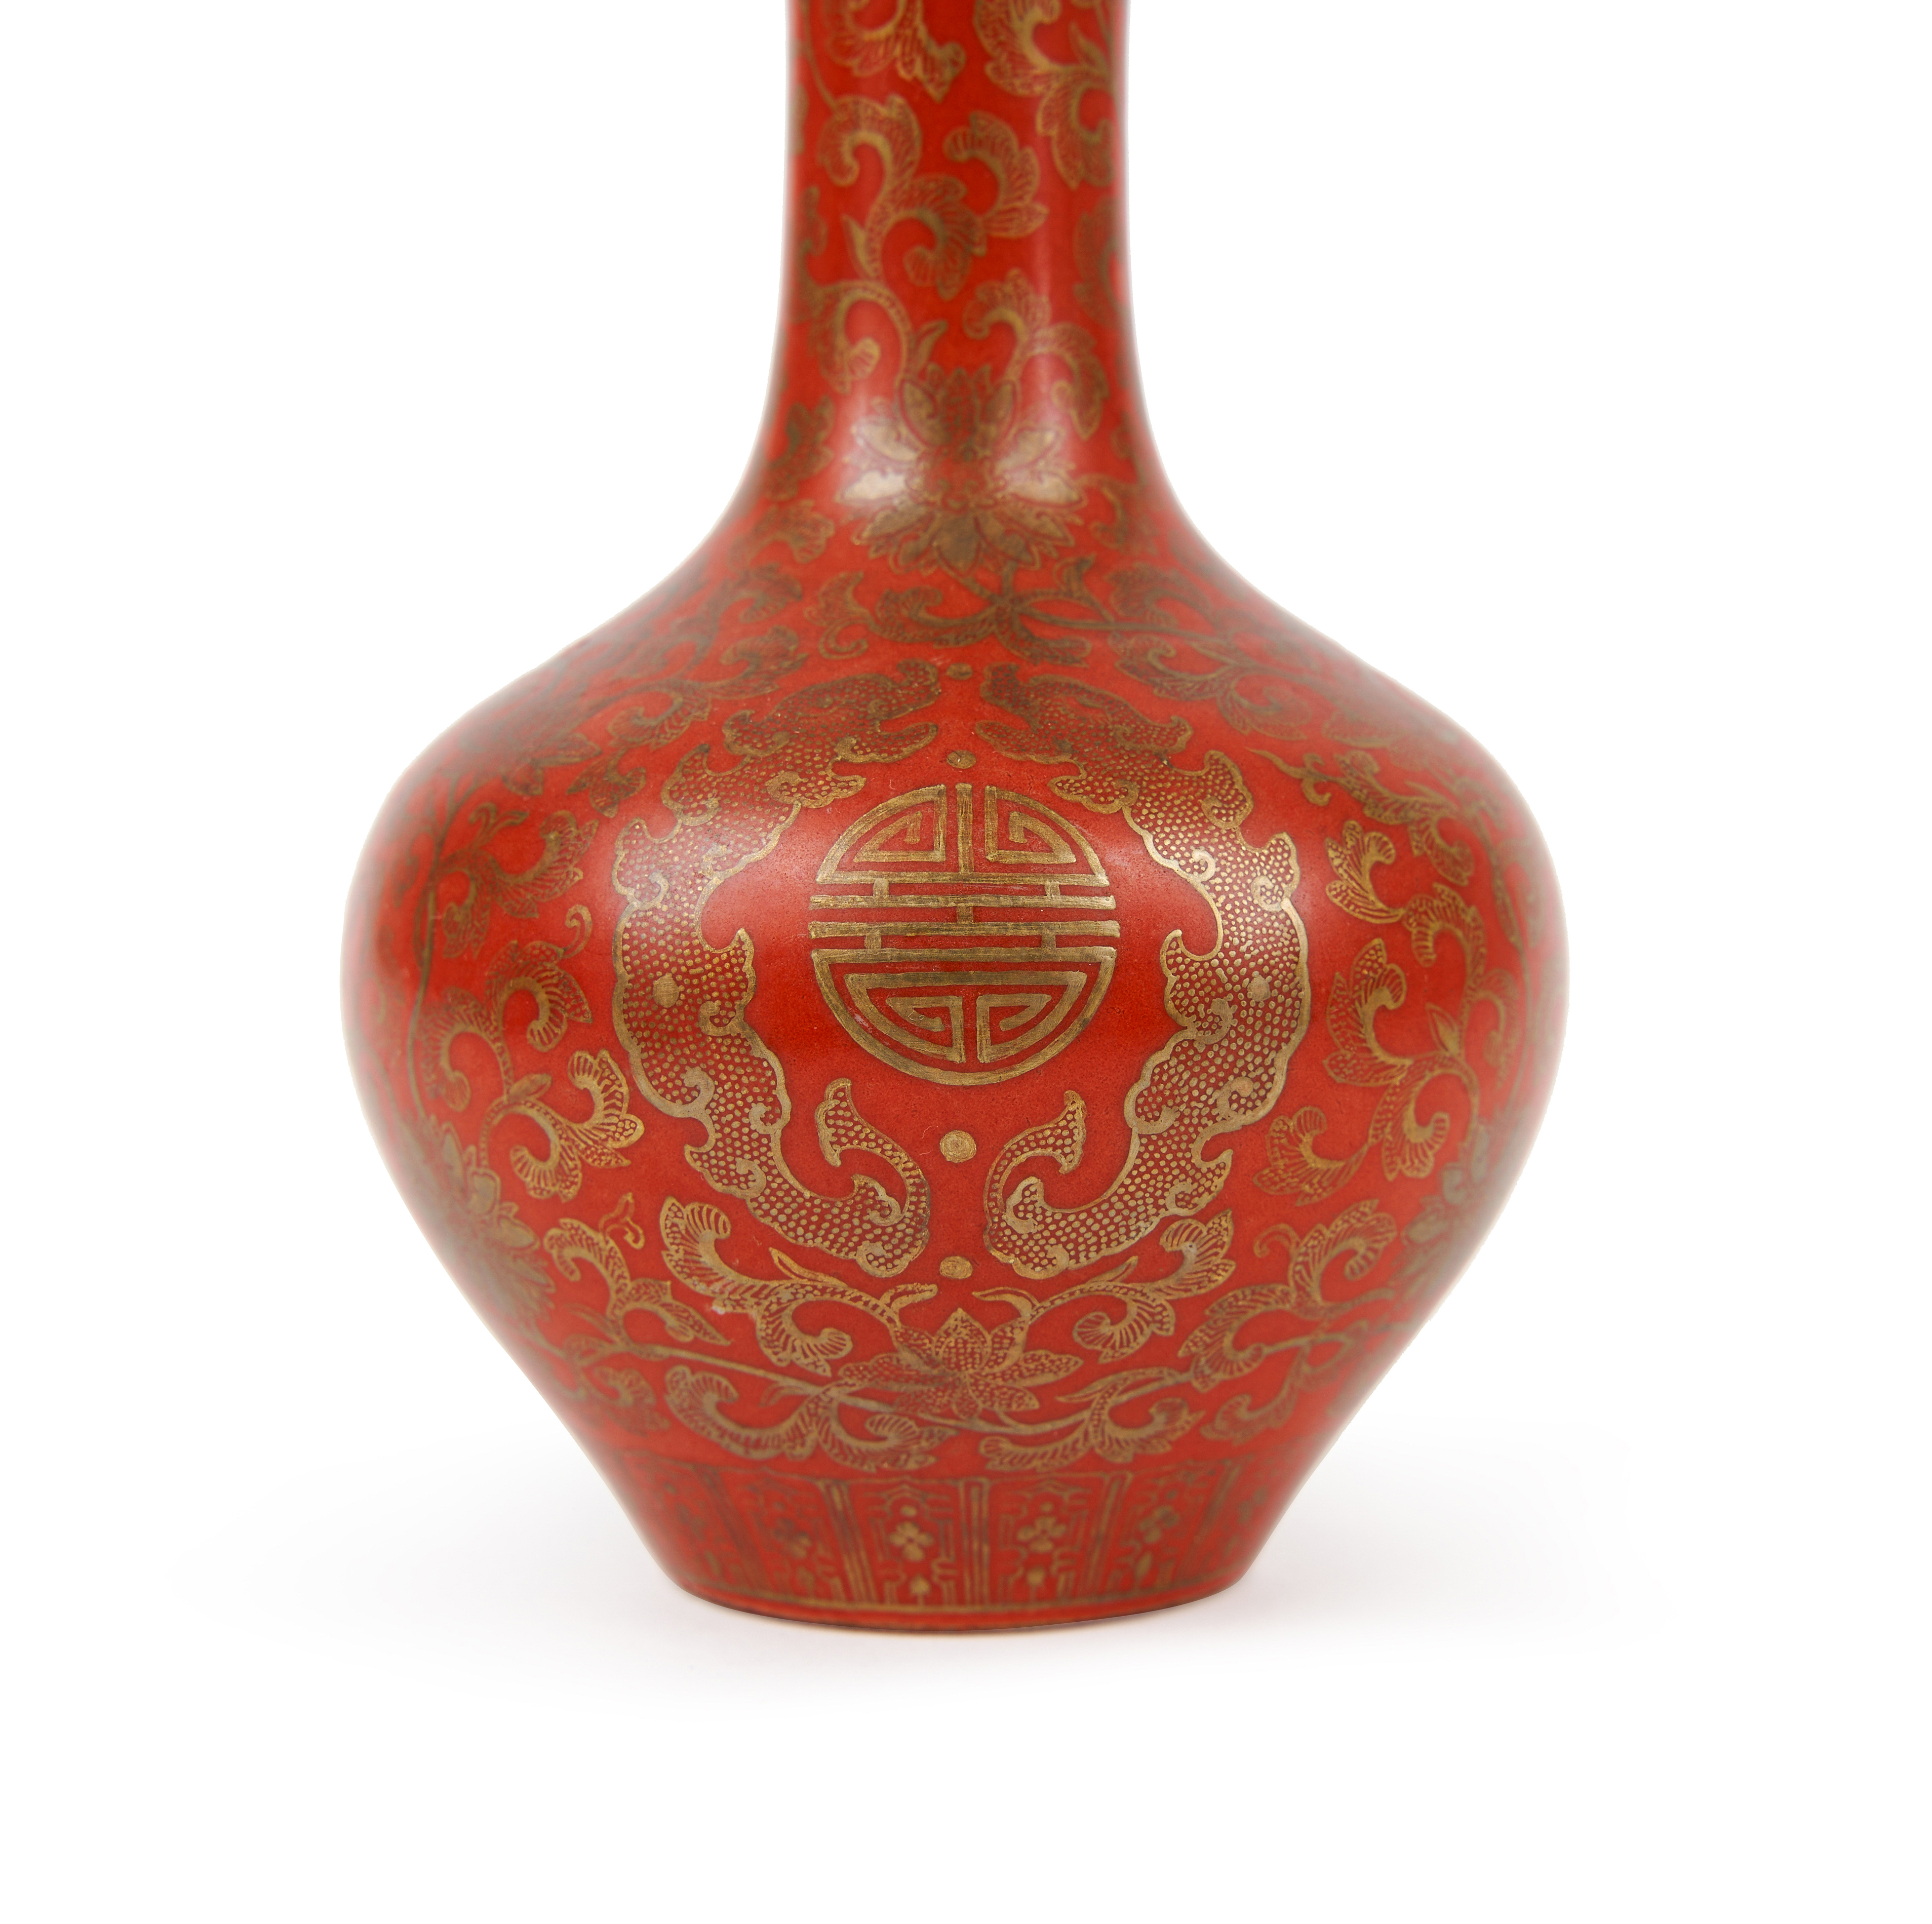 A GILT-DECORATED CORAL-GROUND BOTTLE VASE, QING DYNASTY (1644-1911) - Image 3 of 5